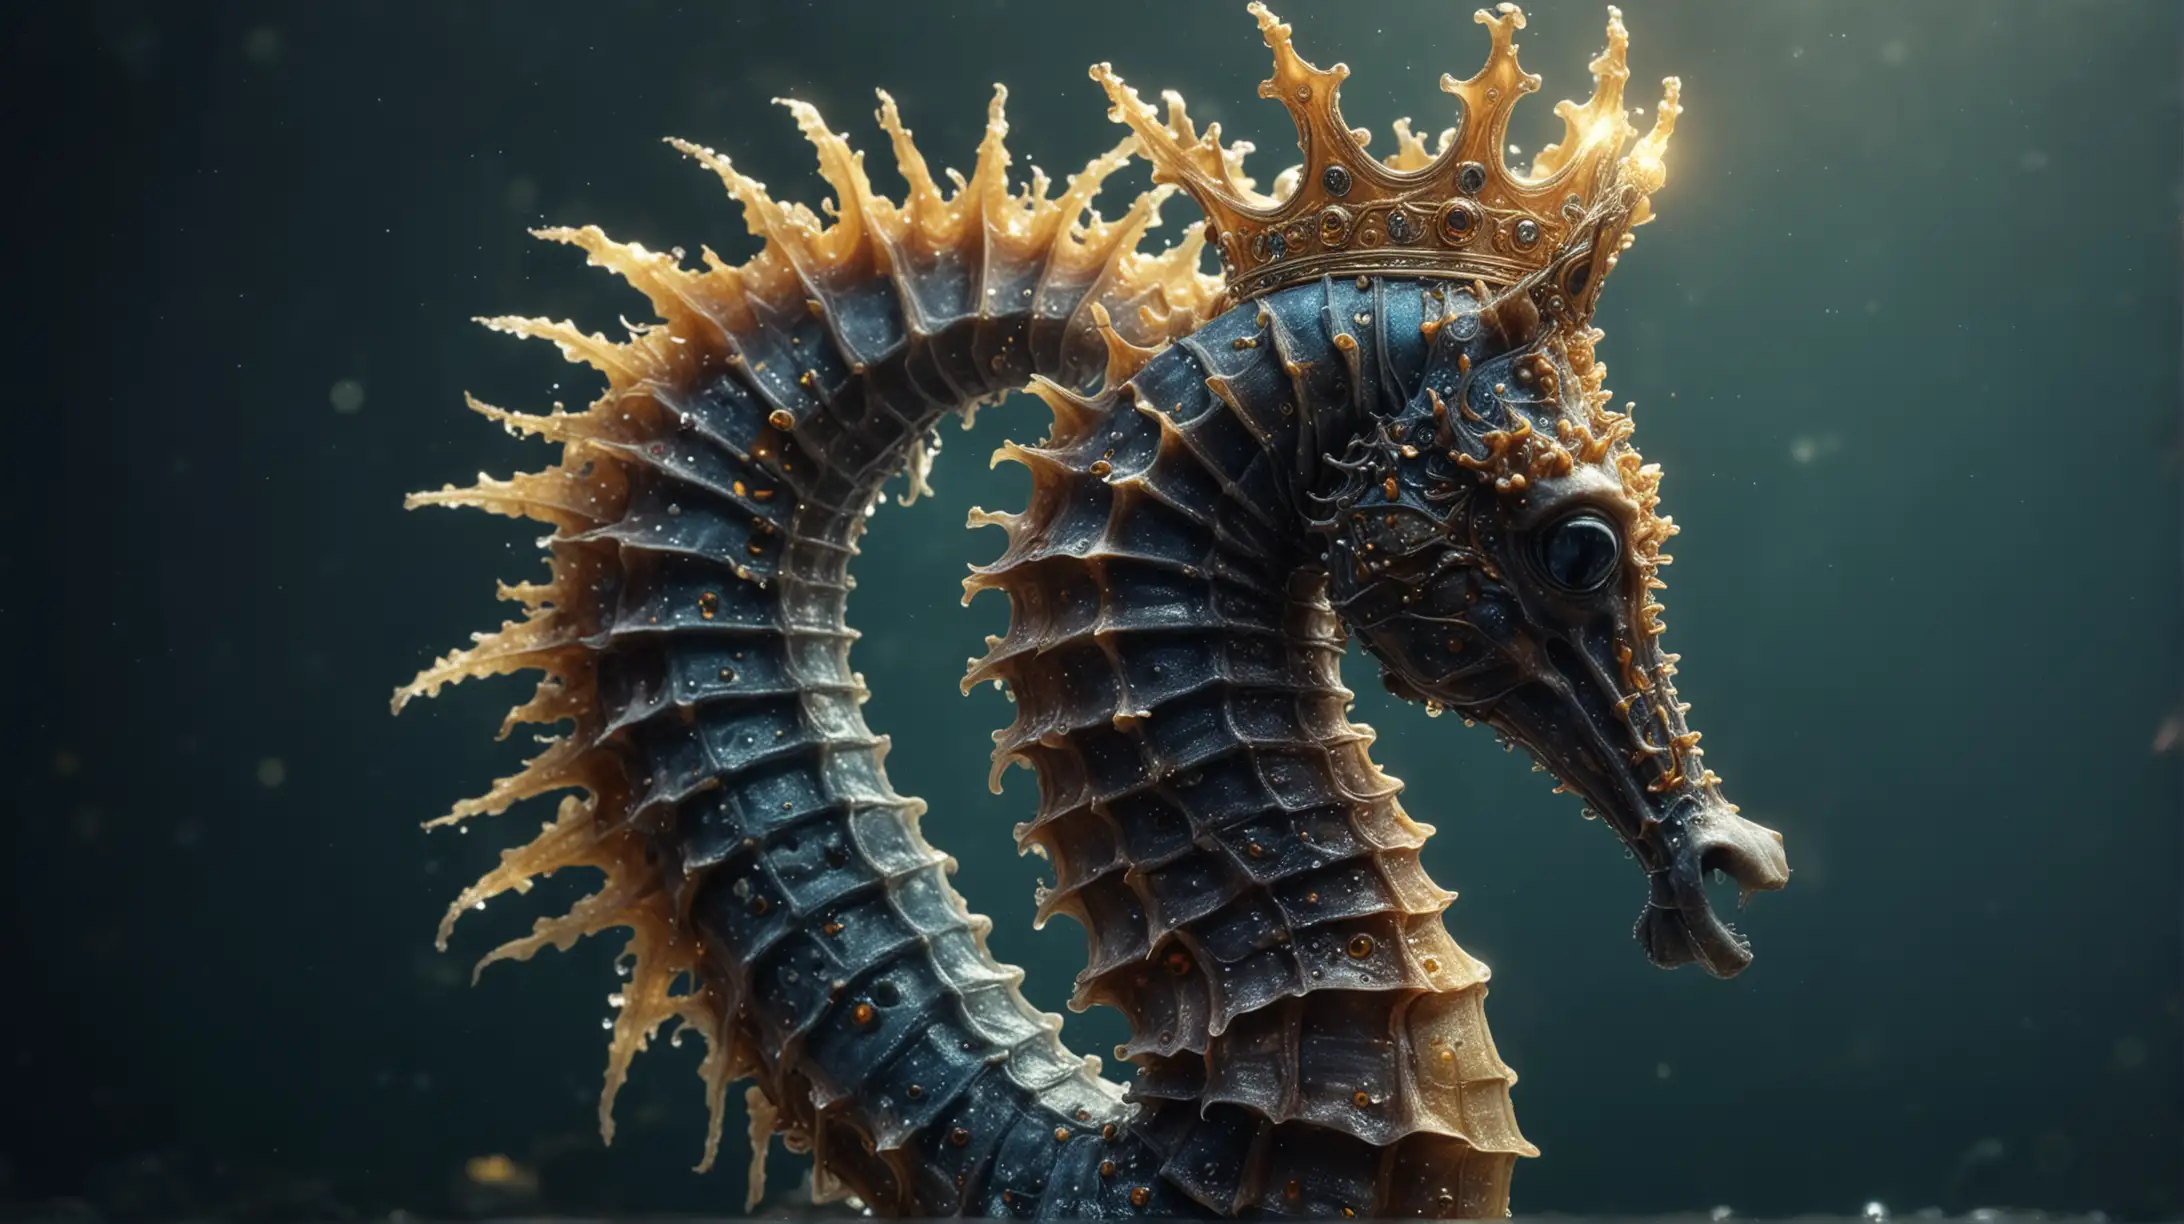 Majestic Glowing Seahorse with Crown in Hyperrealistic Fantasy Art